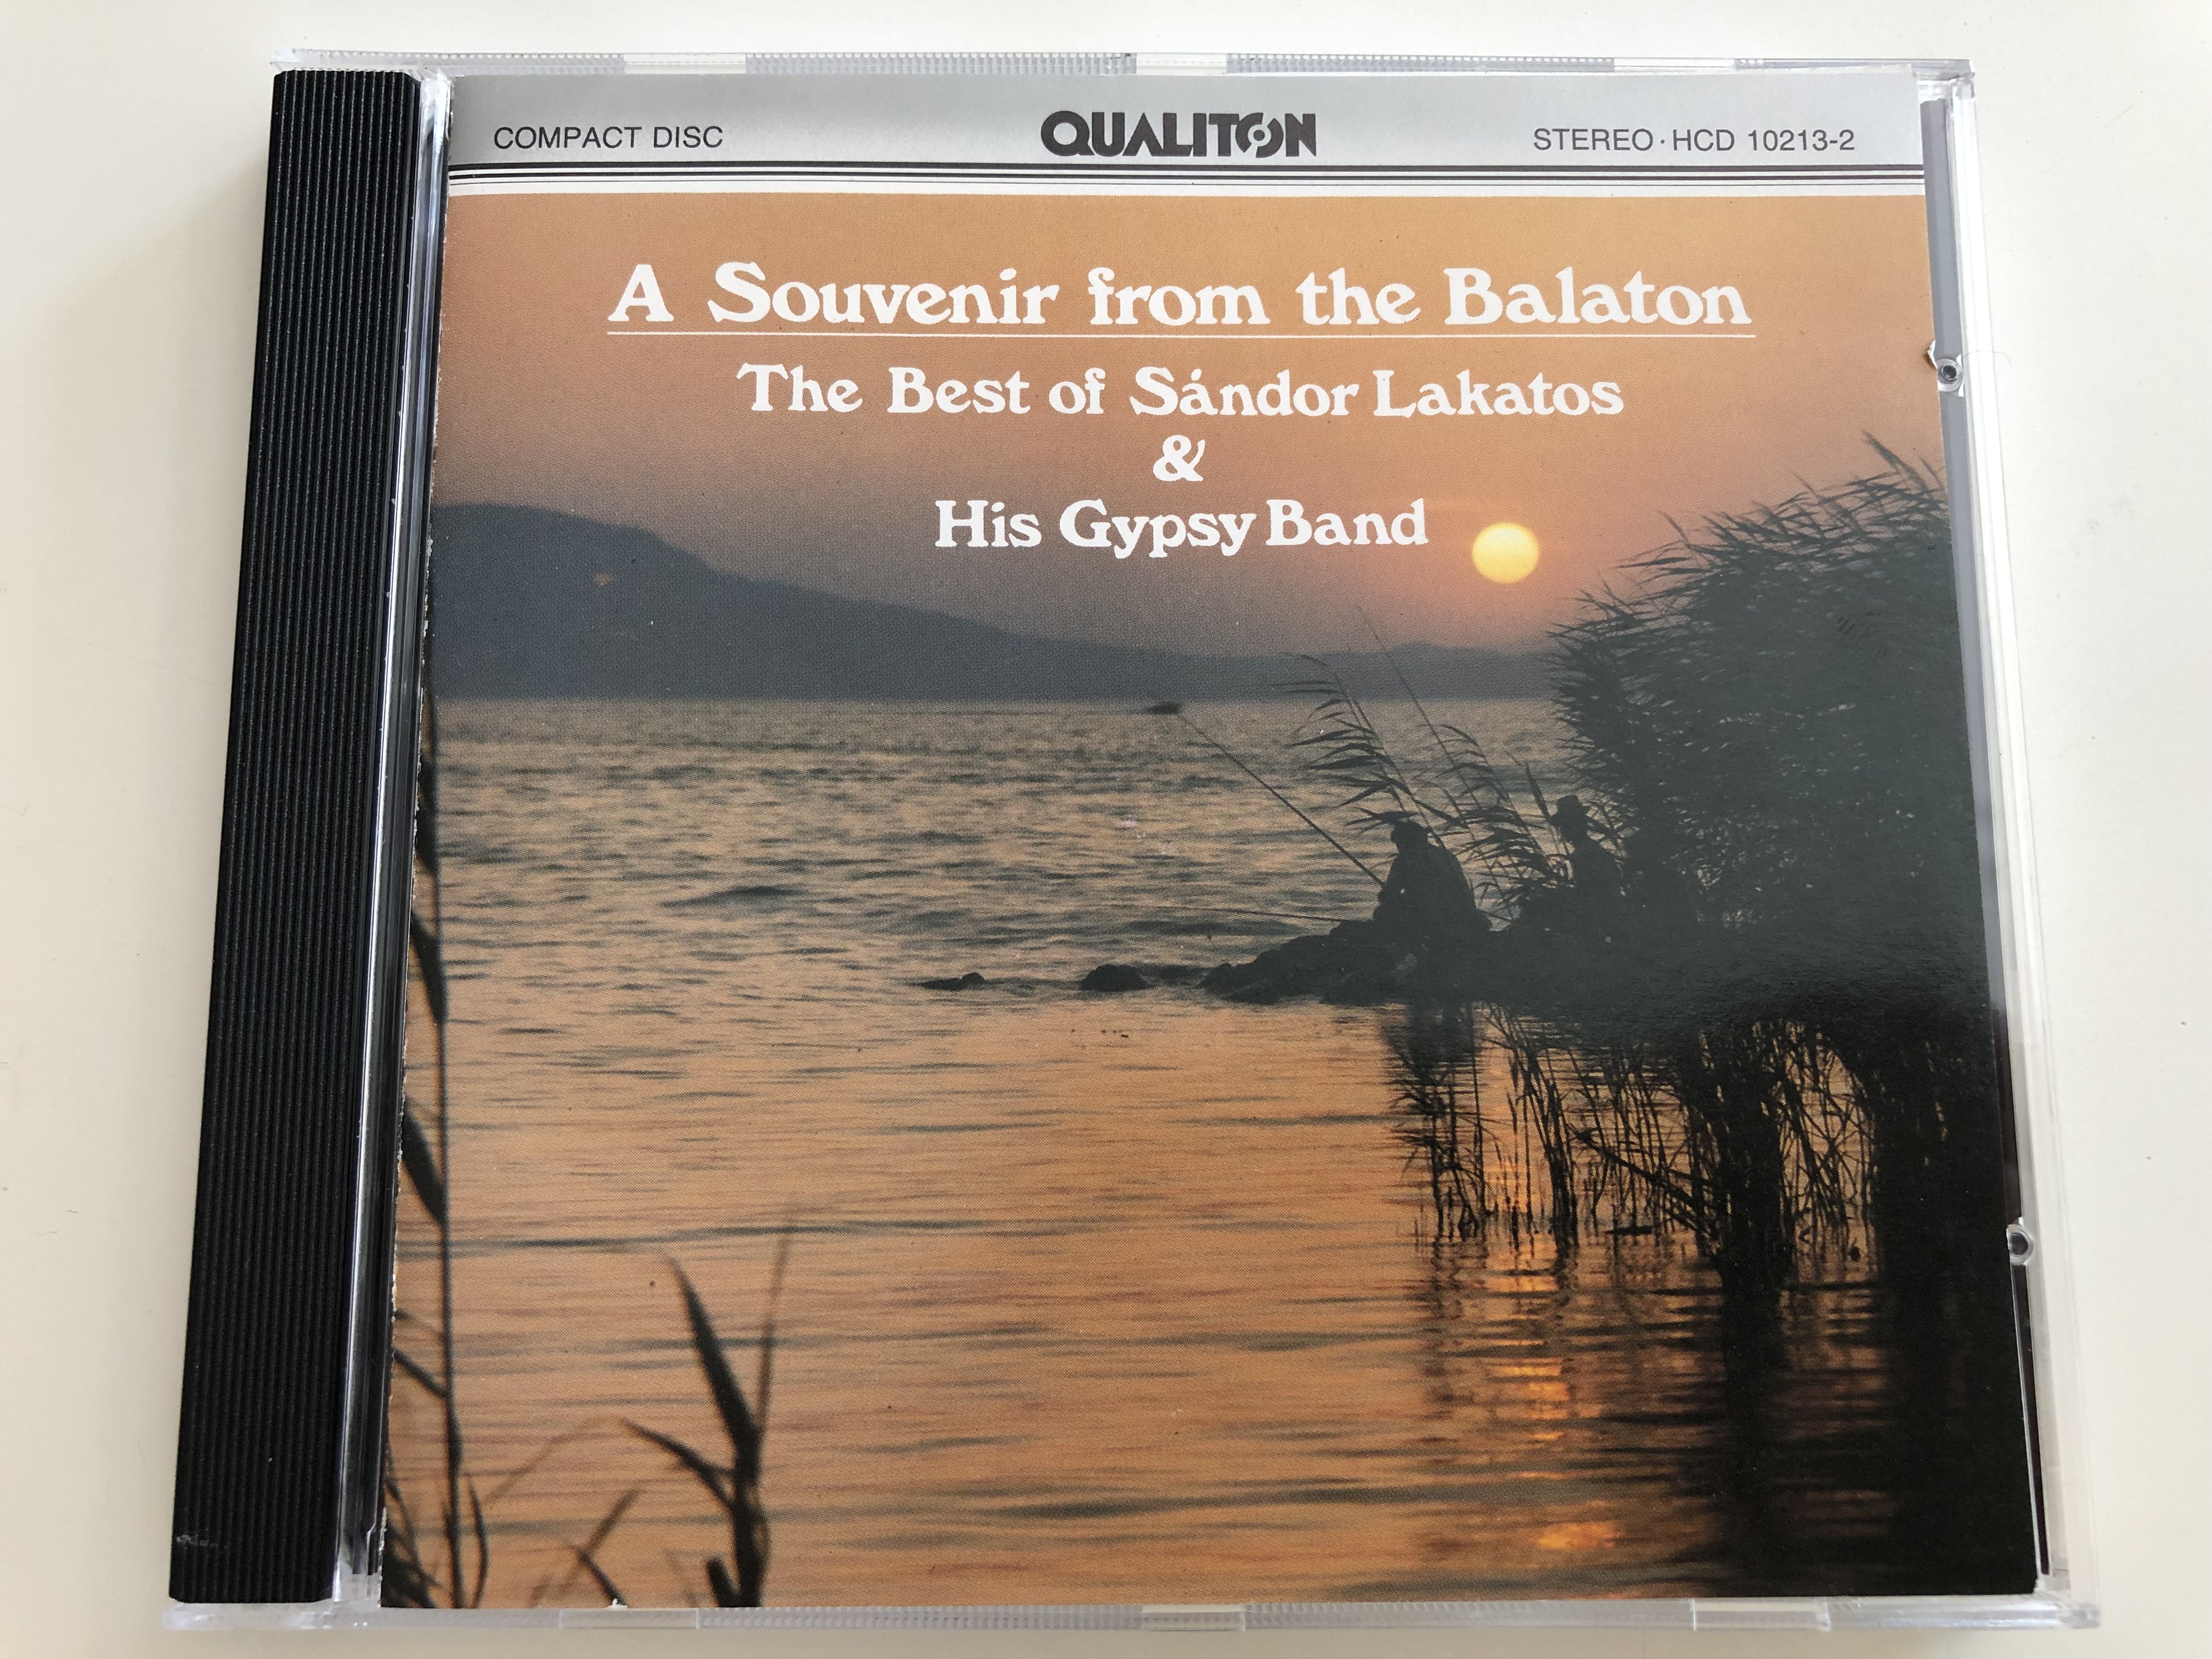 -a-souvenir-from-the-balaton-the-best-of-s-ndor-lakatos-his-gypsy-band-qualiton-hcd-10213-2-audio-cd-1985-1-.jpg